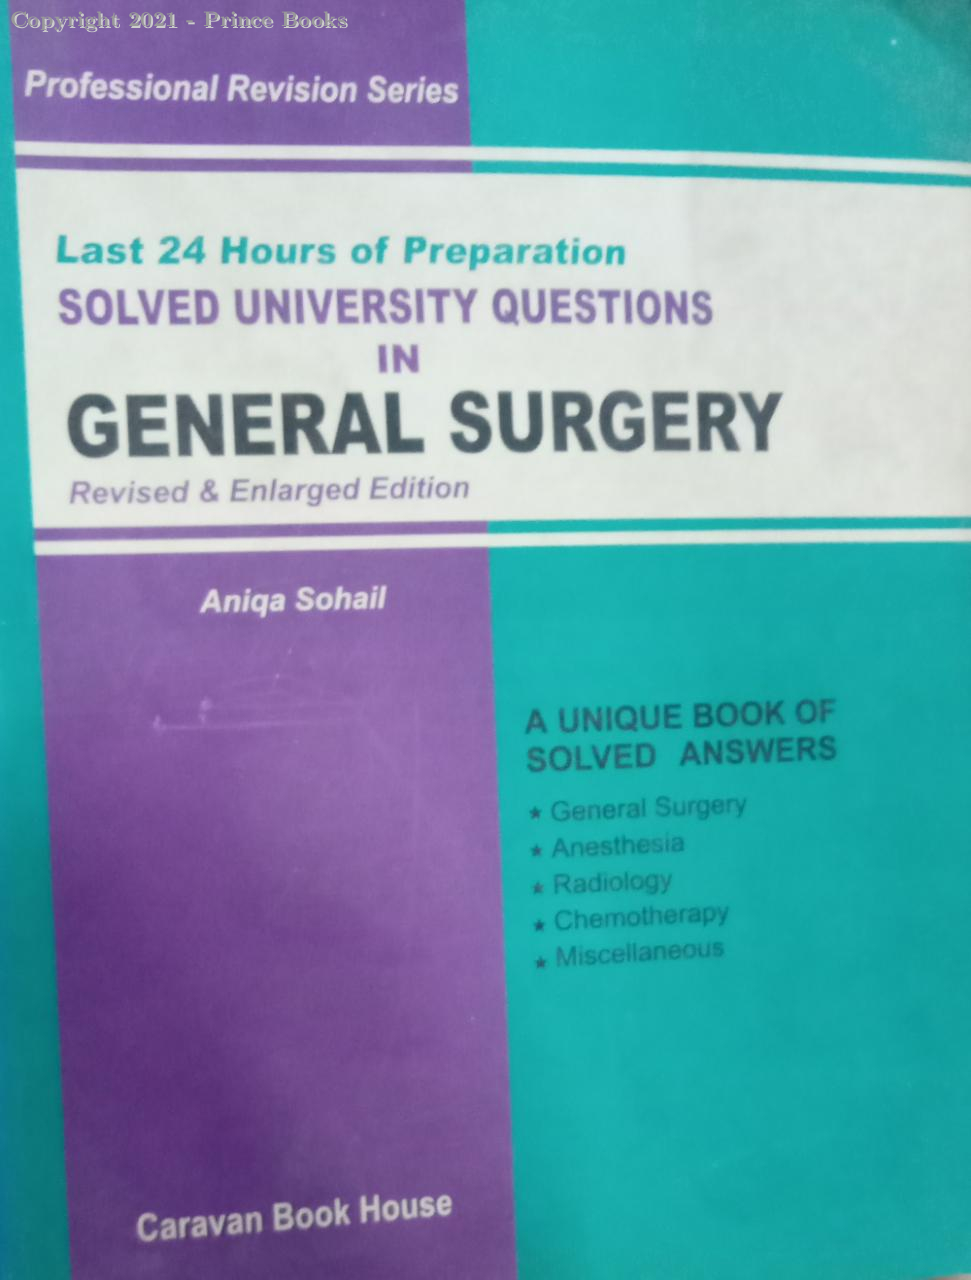 LAST 24 HOURS OF PREPARATION SOLVED UNIVERSITY QUESTIONS IN GENERAL SURGERY